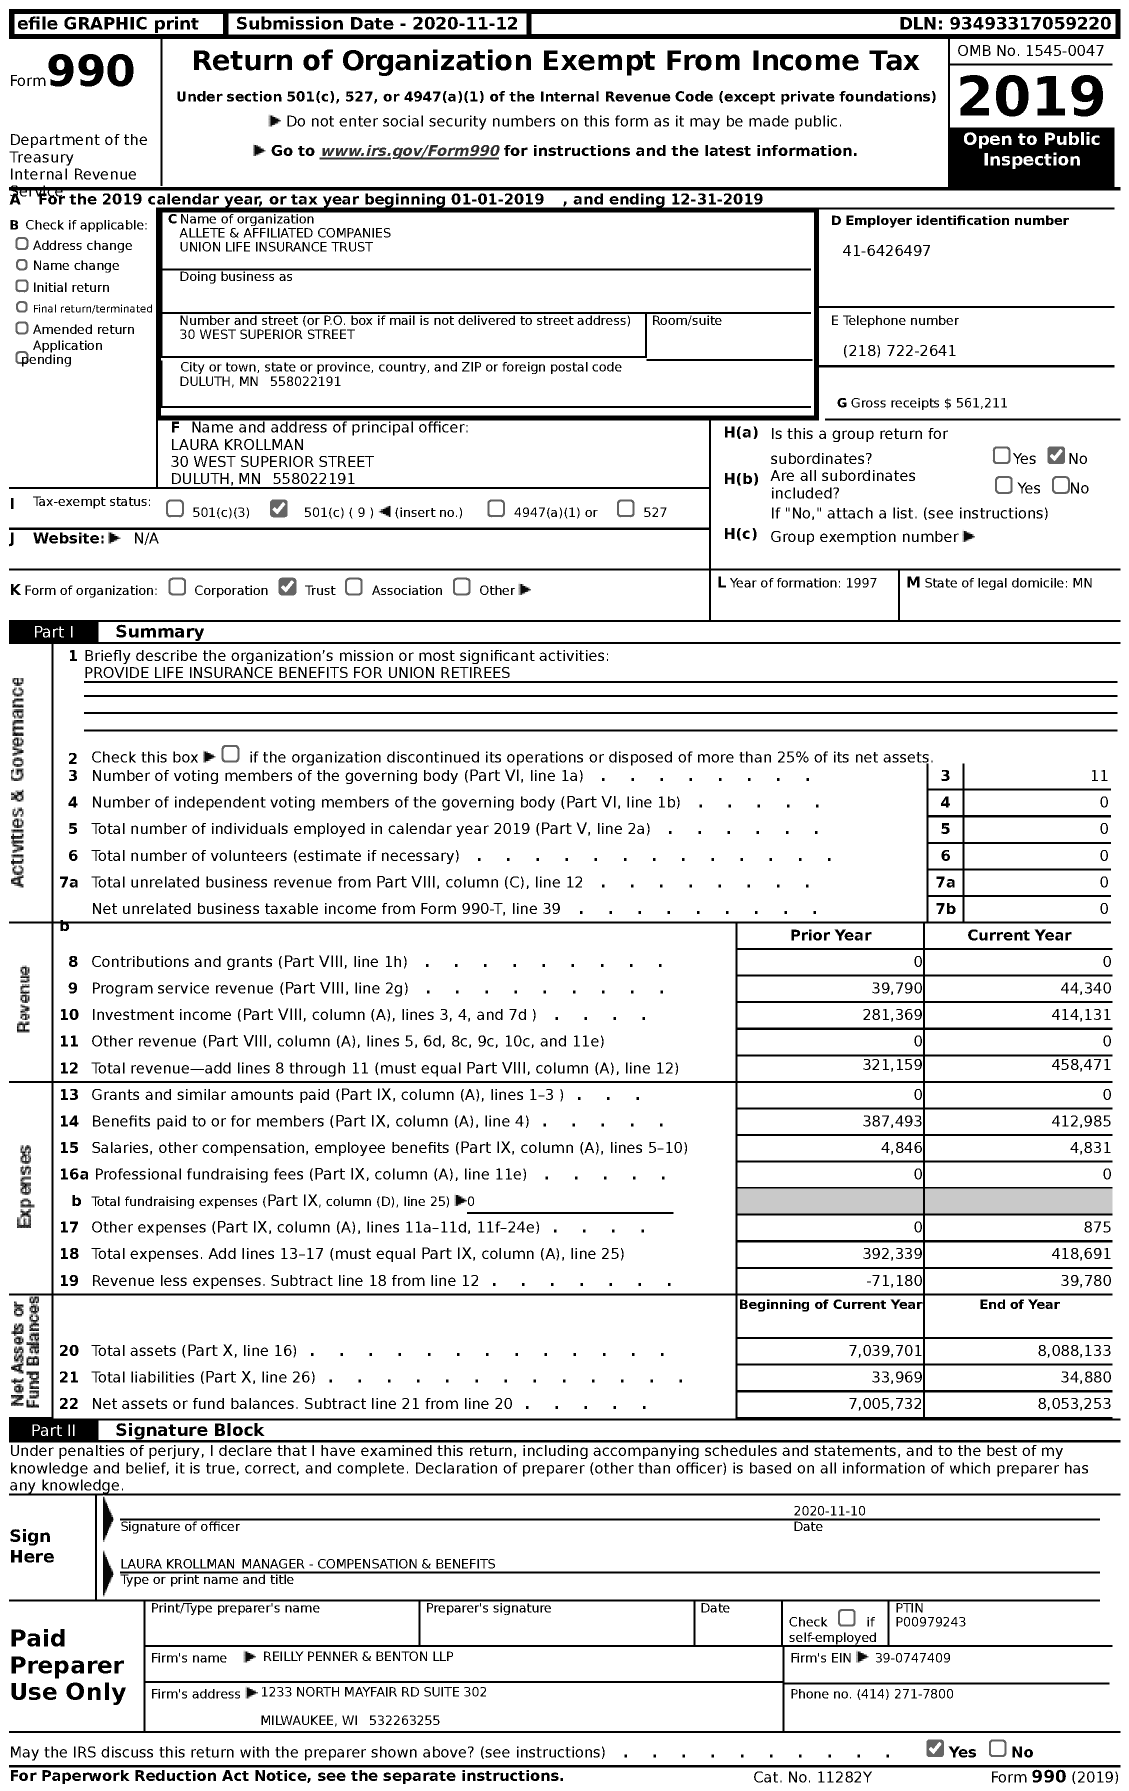 Image of first page of 2019 Form 990 for Allete and Affiliated Companies Union Life Insurance Trust